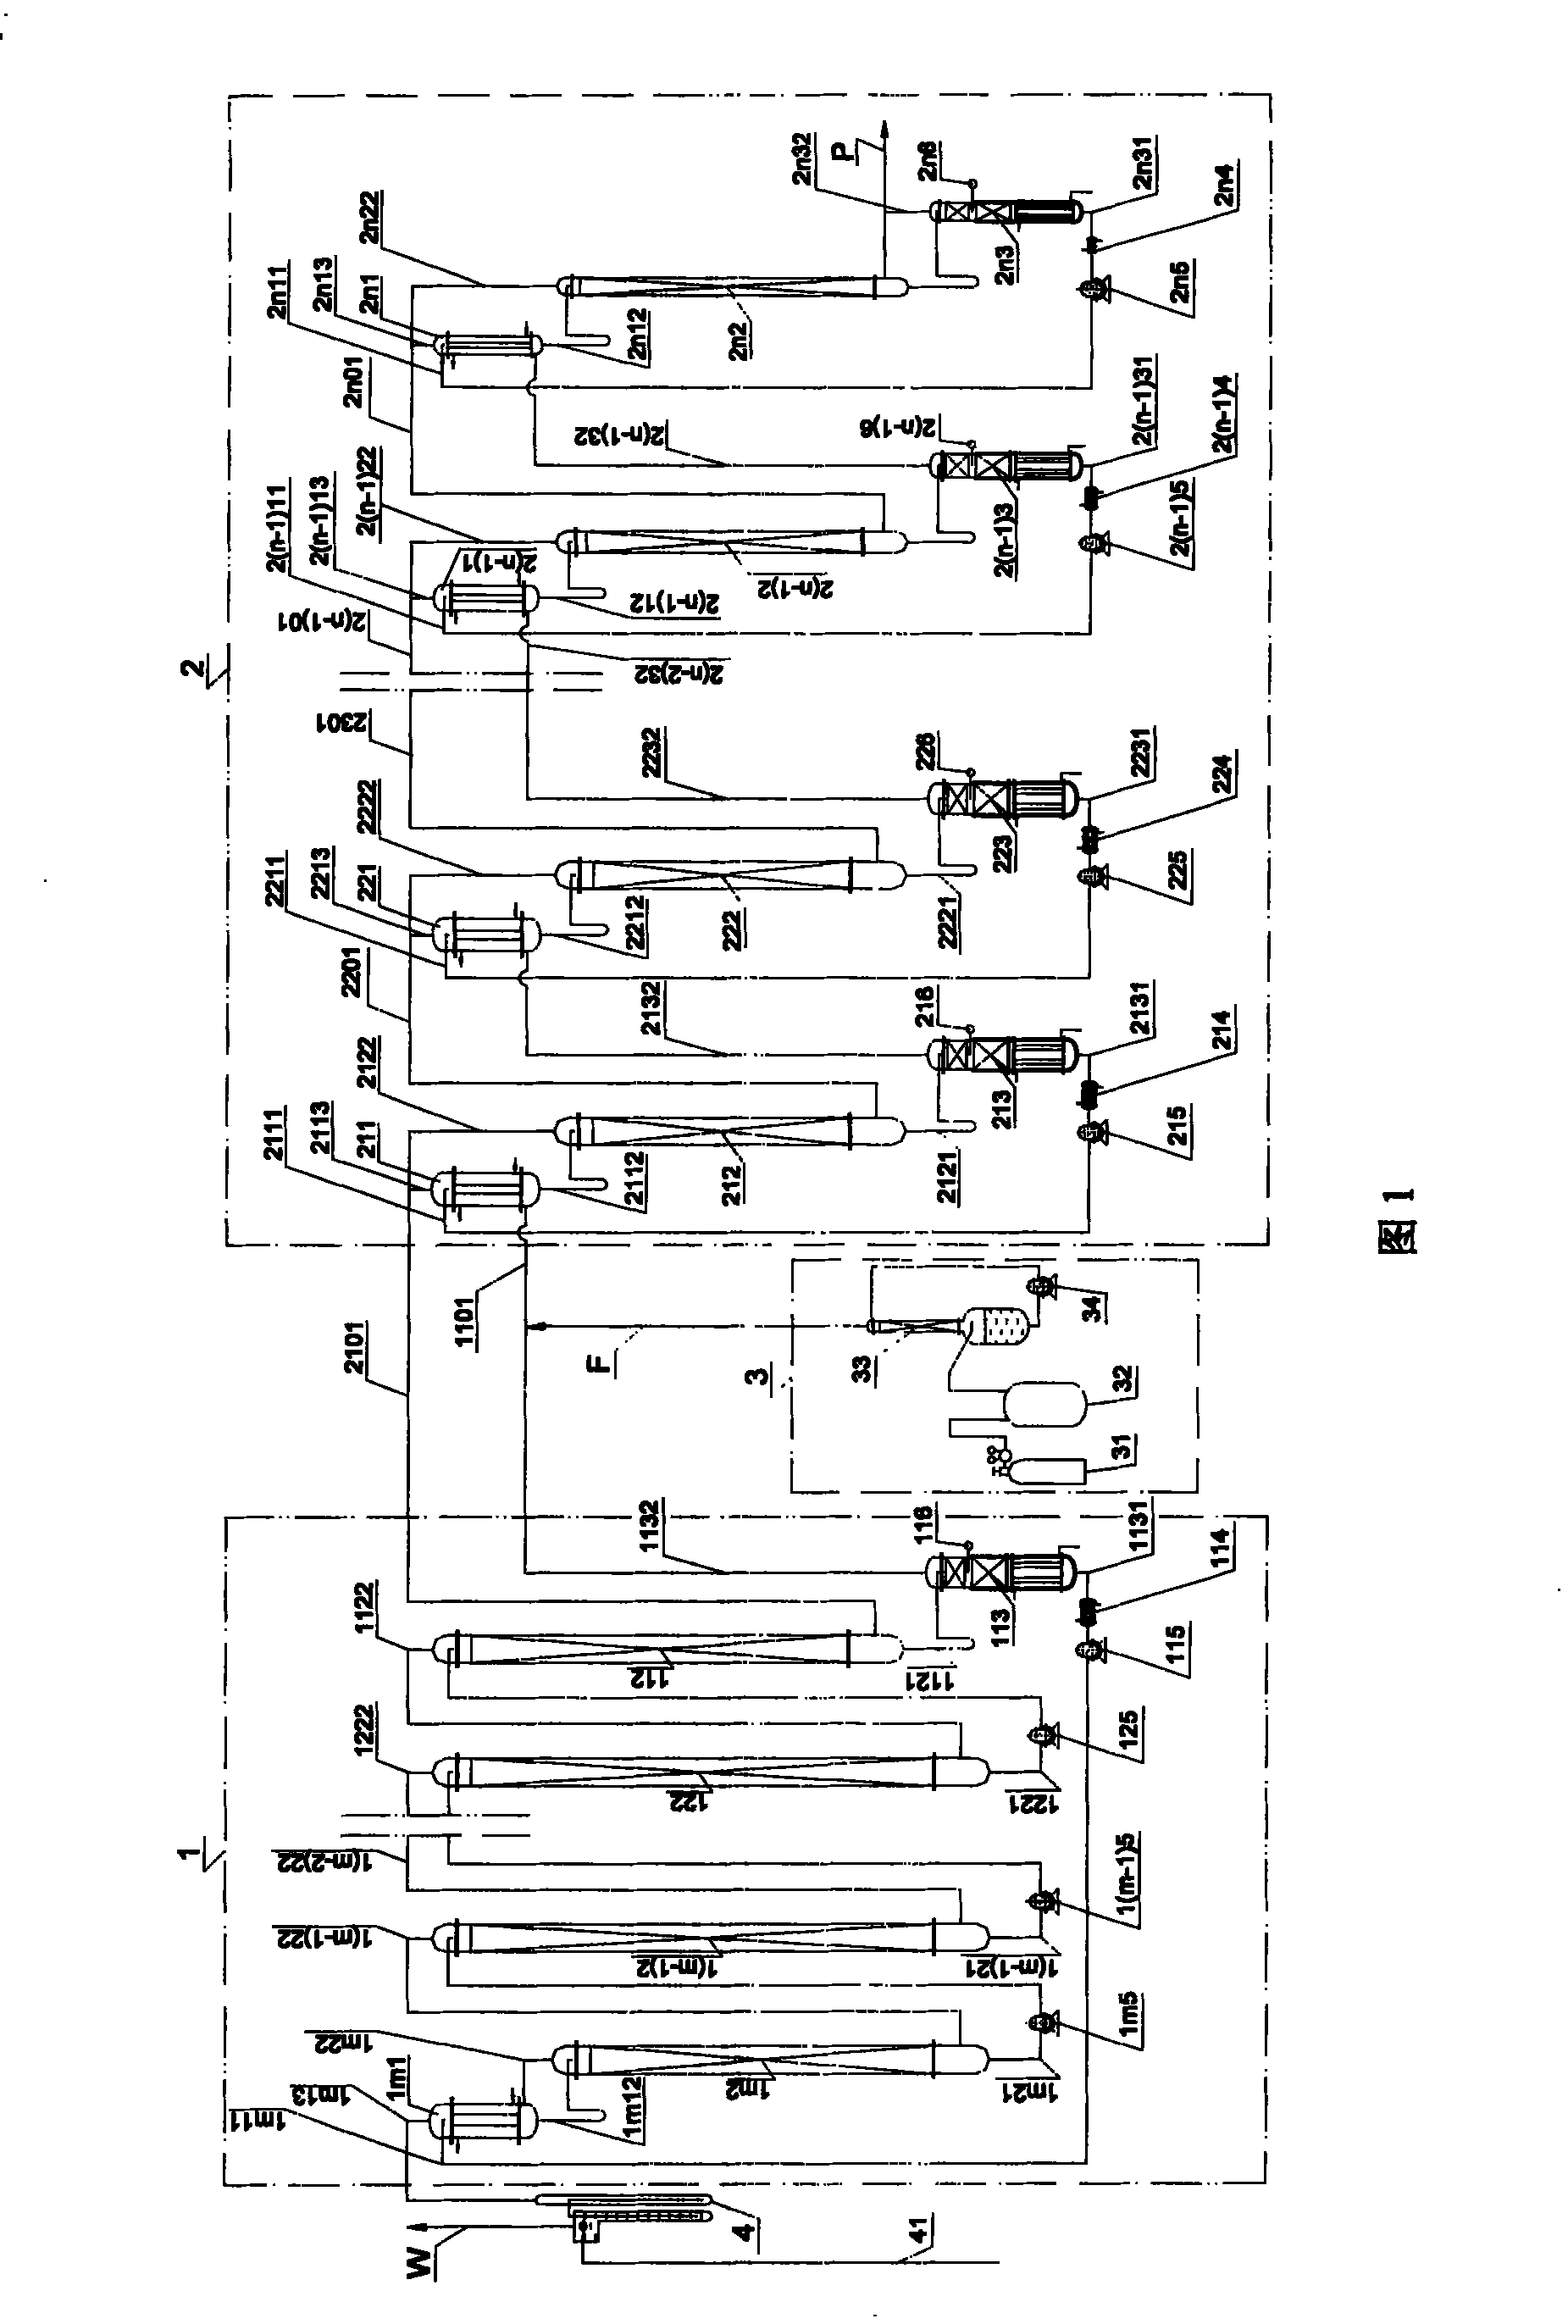 Method and system for producing high concentration carbon dioxide of carbon-13